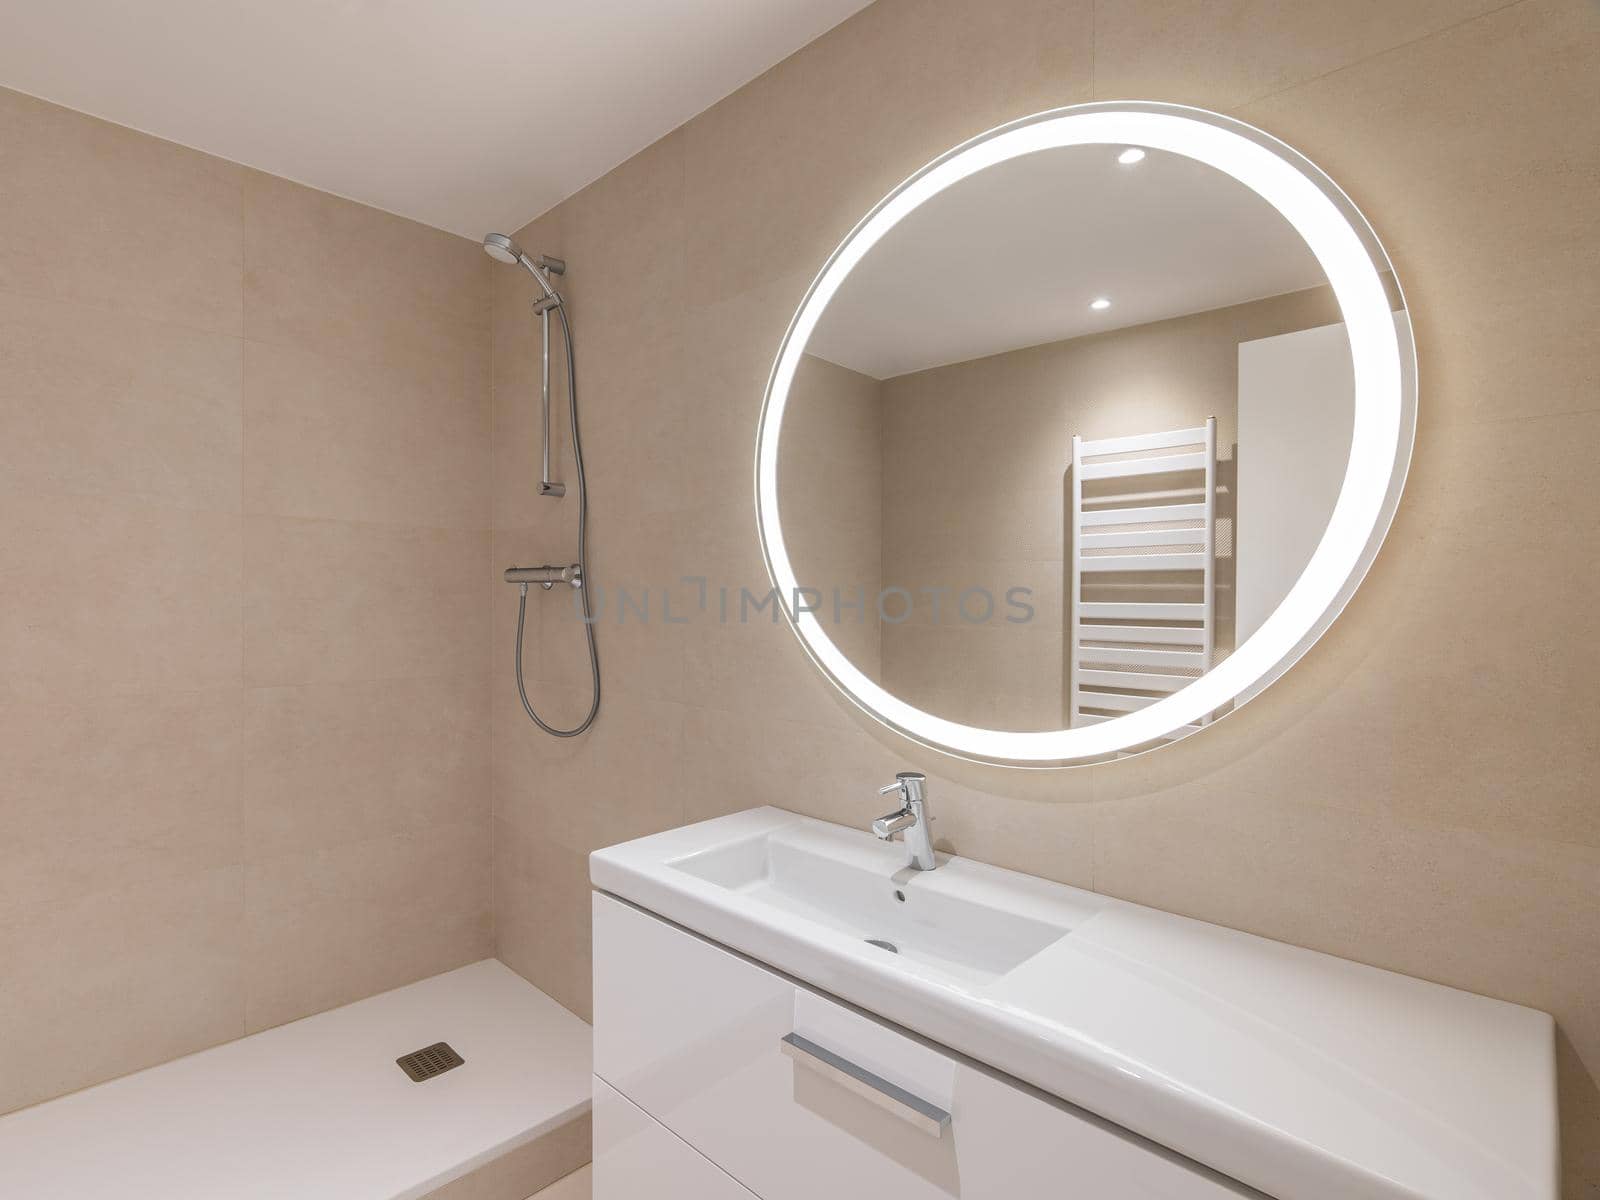 Modern bathroom with beige tiles, furniture, shower and round large mirror with lighting.